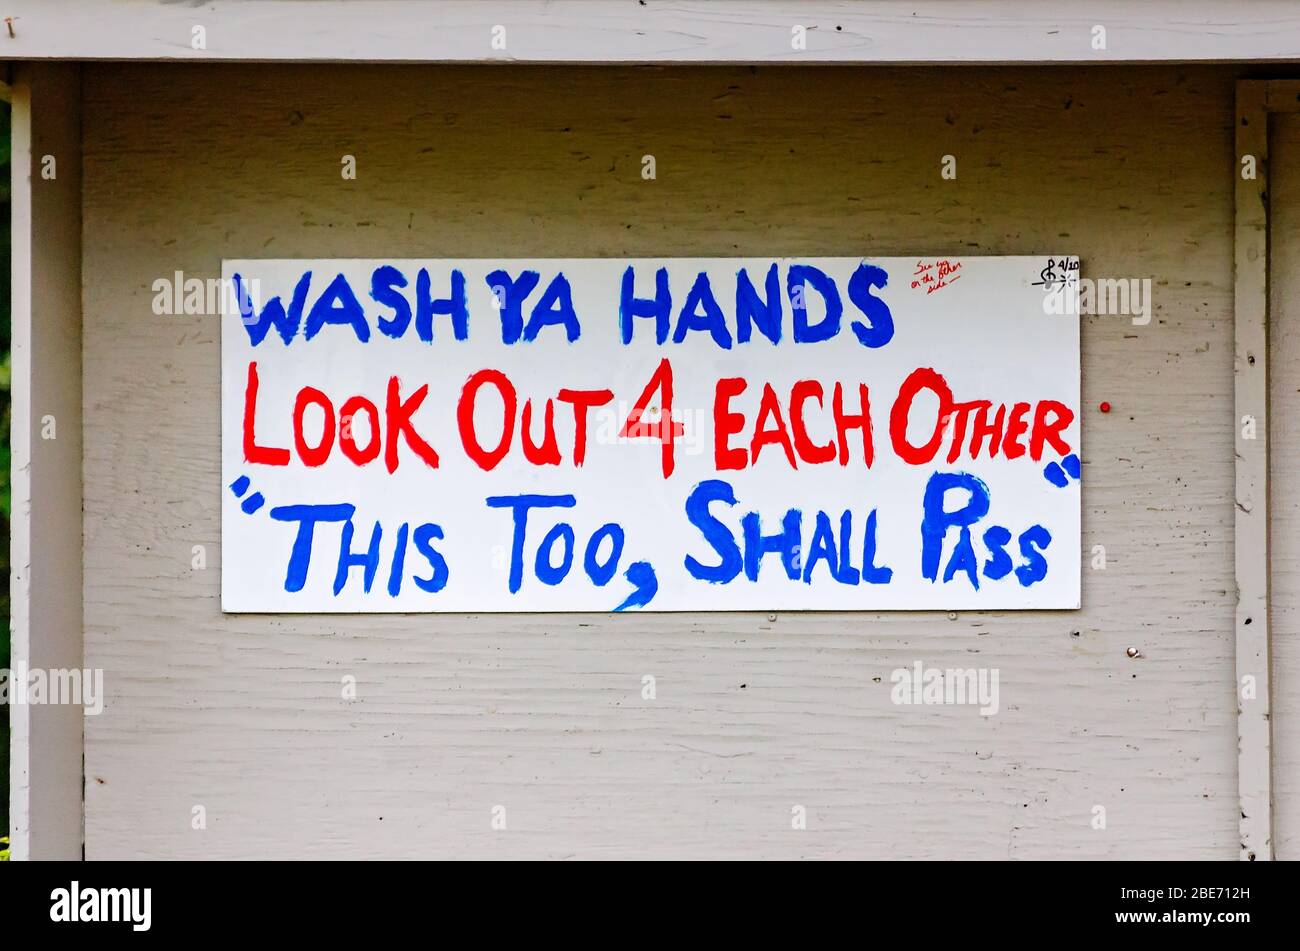 A homemade sign reminds people at Medal of Honor Park to wash their hands and look out for each other during the COVID-19 pandemic in Mobile, Alabama. Stock Photo